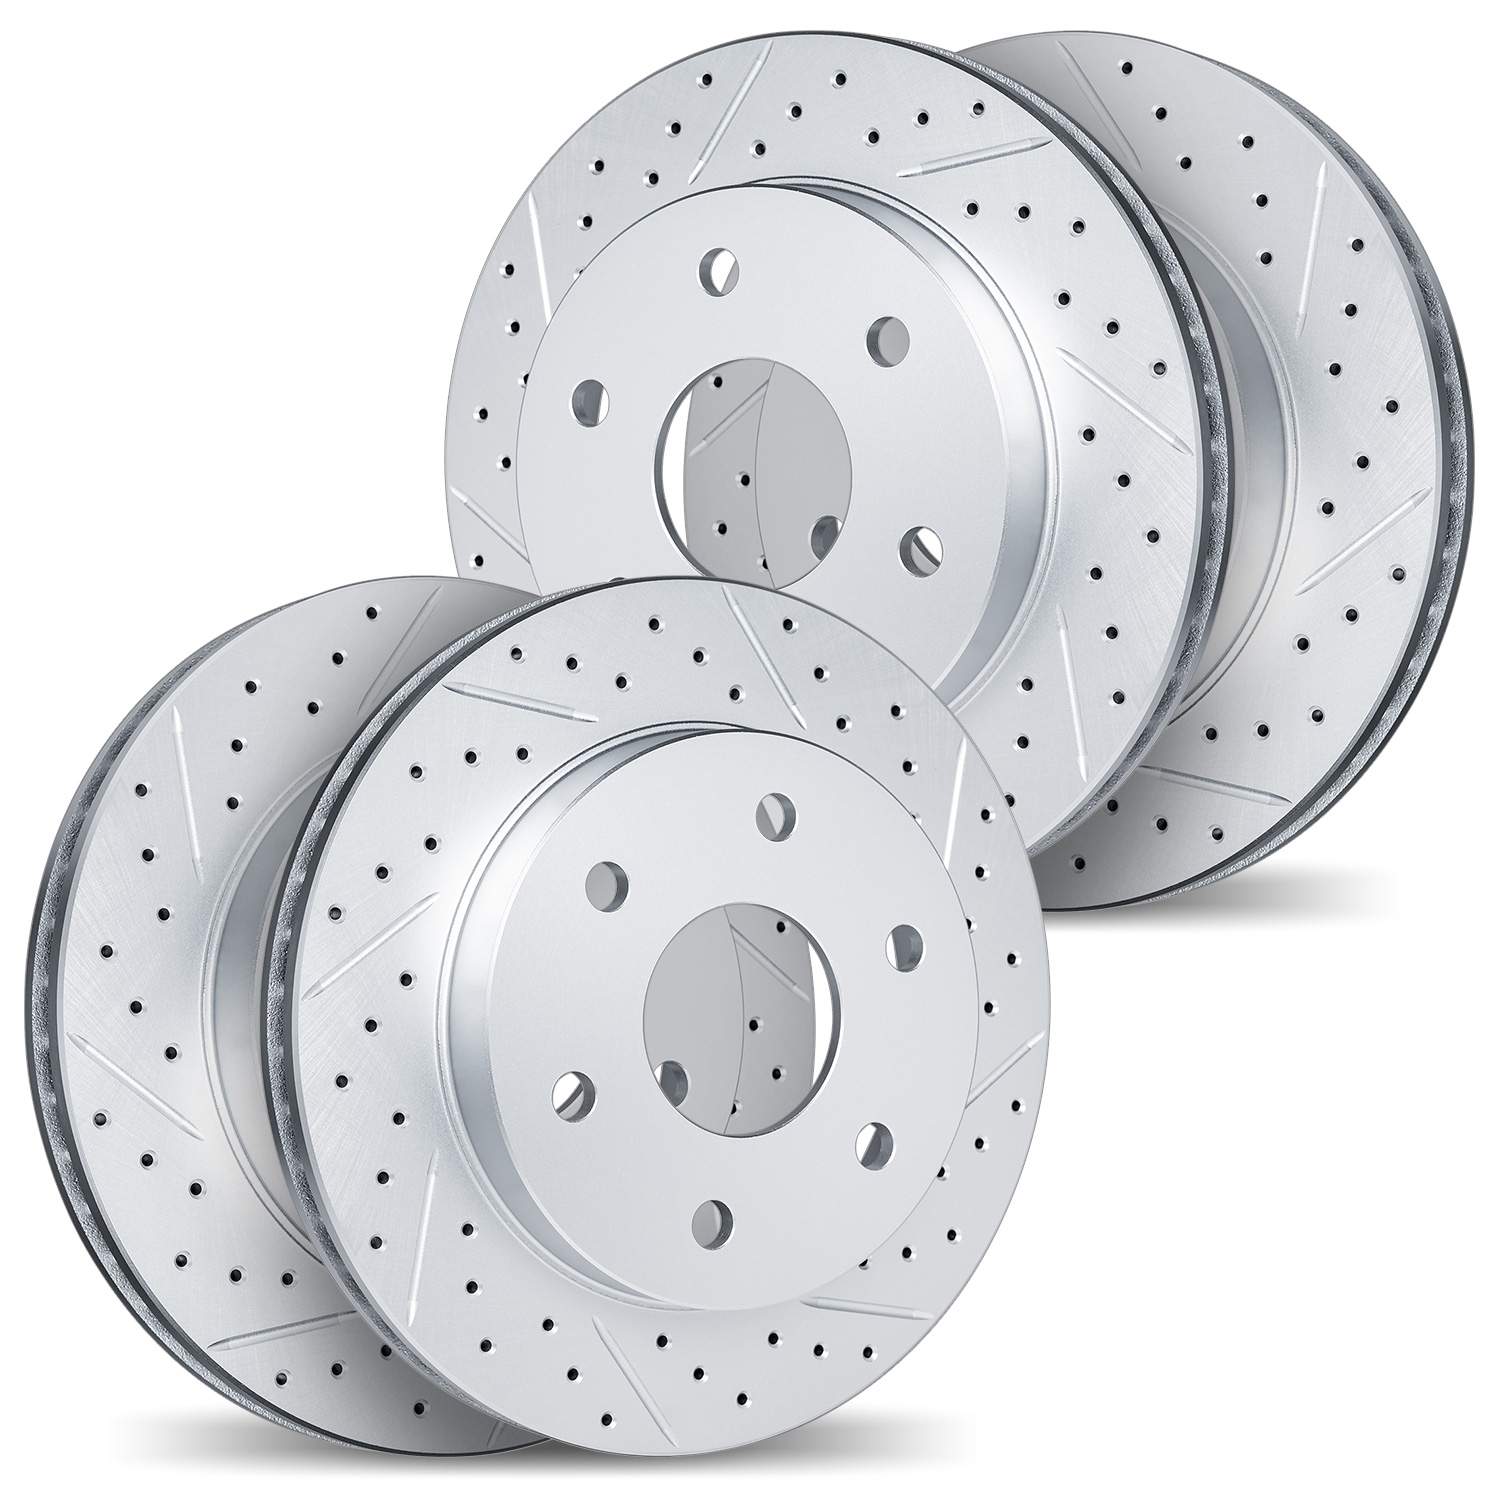 2004-76066 Geoperformance Drilled/Slotted Brake Rotors, 2001-2007 Lexus/Toyota/Scion, Position: Front and Rear